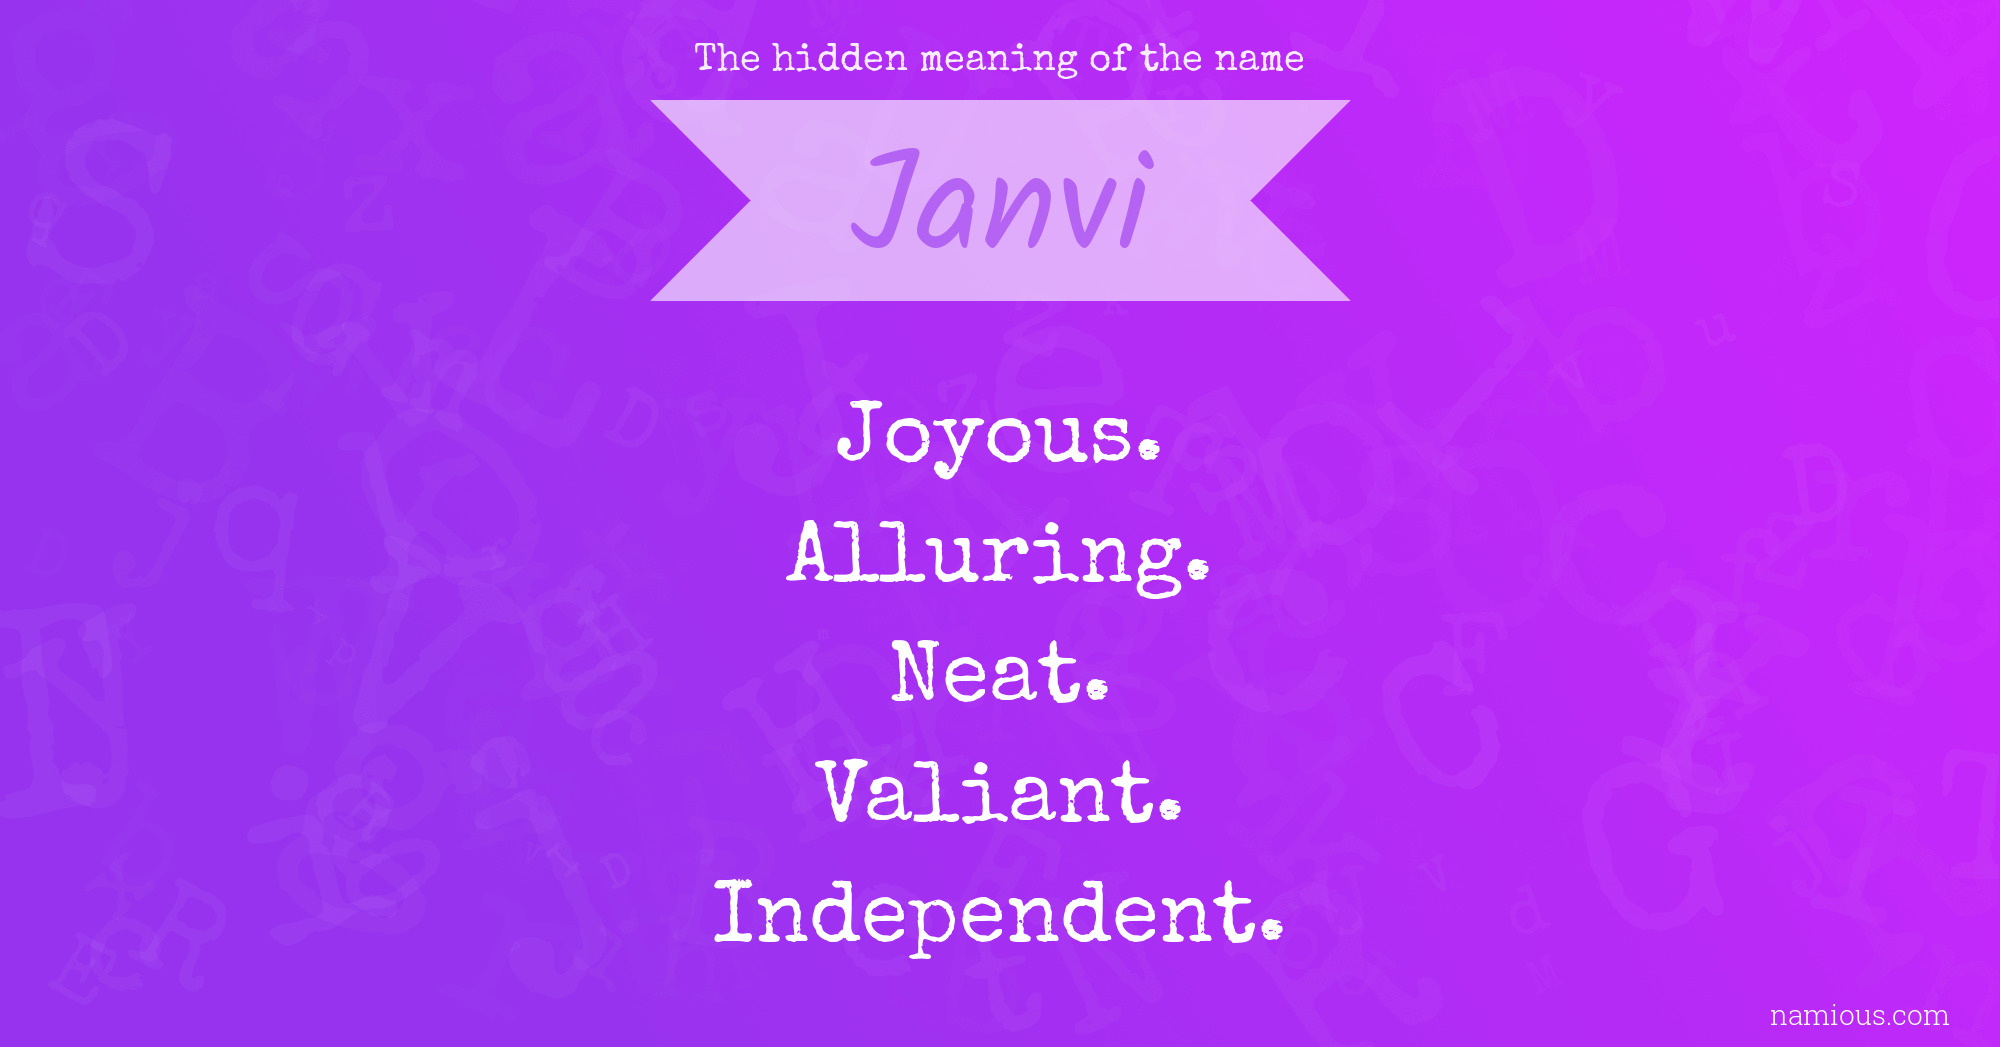 The hidden meaning of the name Janvi